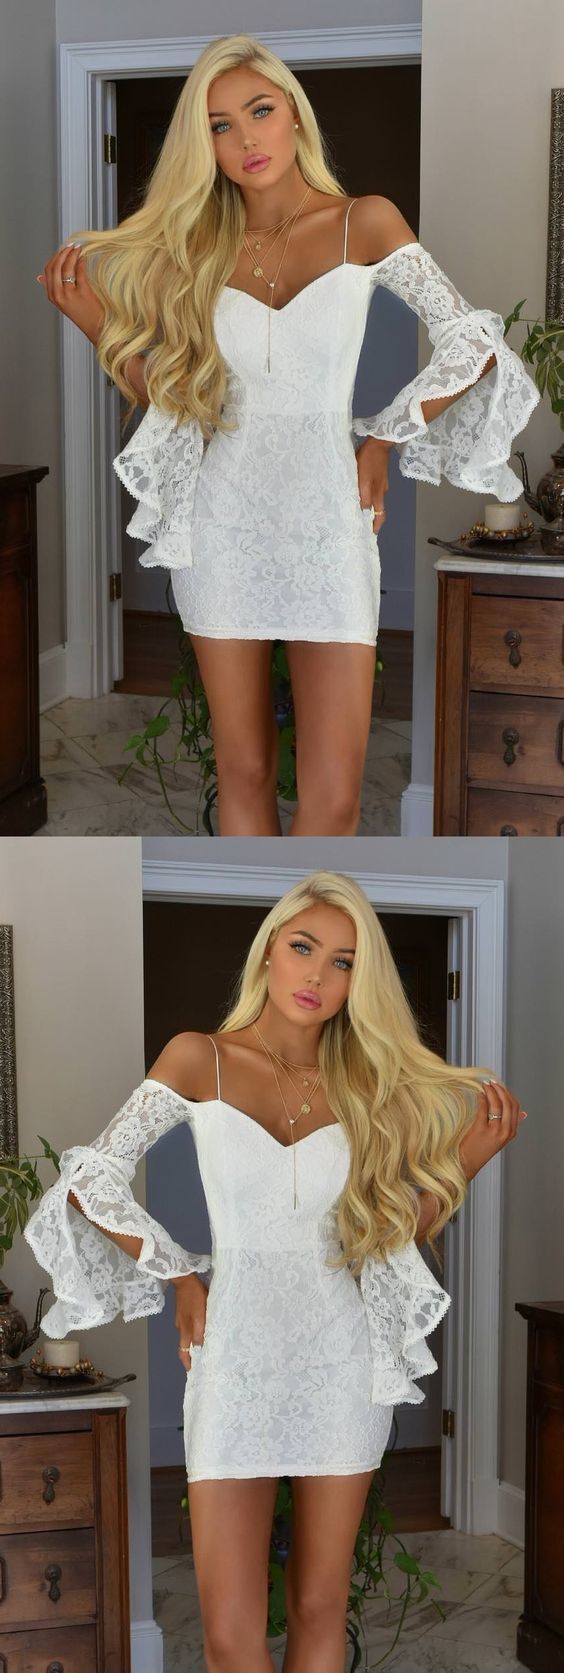 Sheath Off-the-Shoulder Bell Sleeves Short White Lace Homecoming Cocktail Dress -   15 dress Tight sleeves ideas